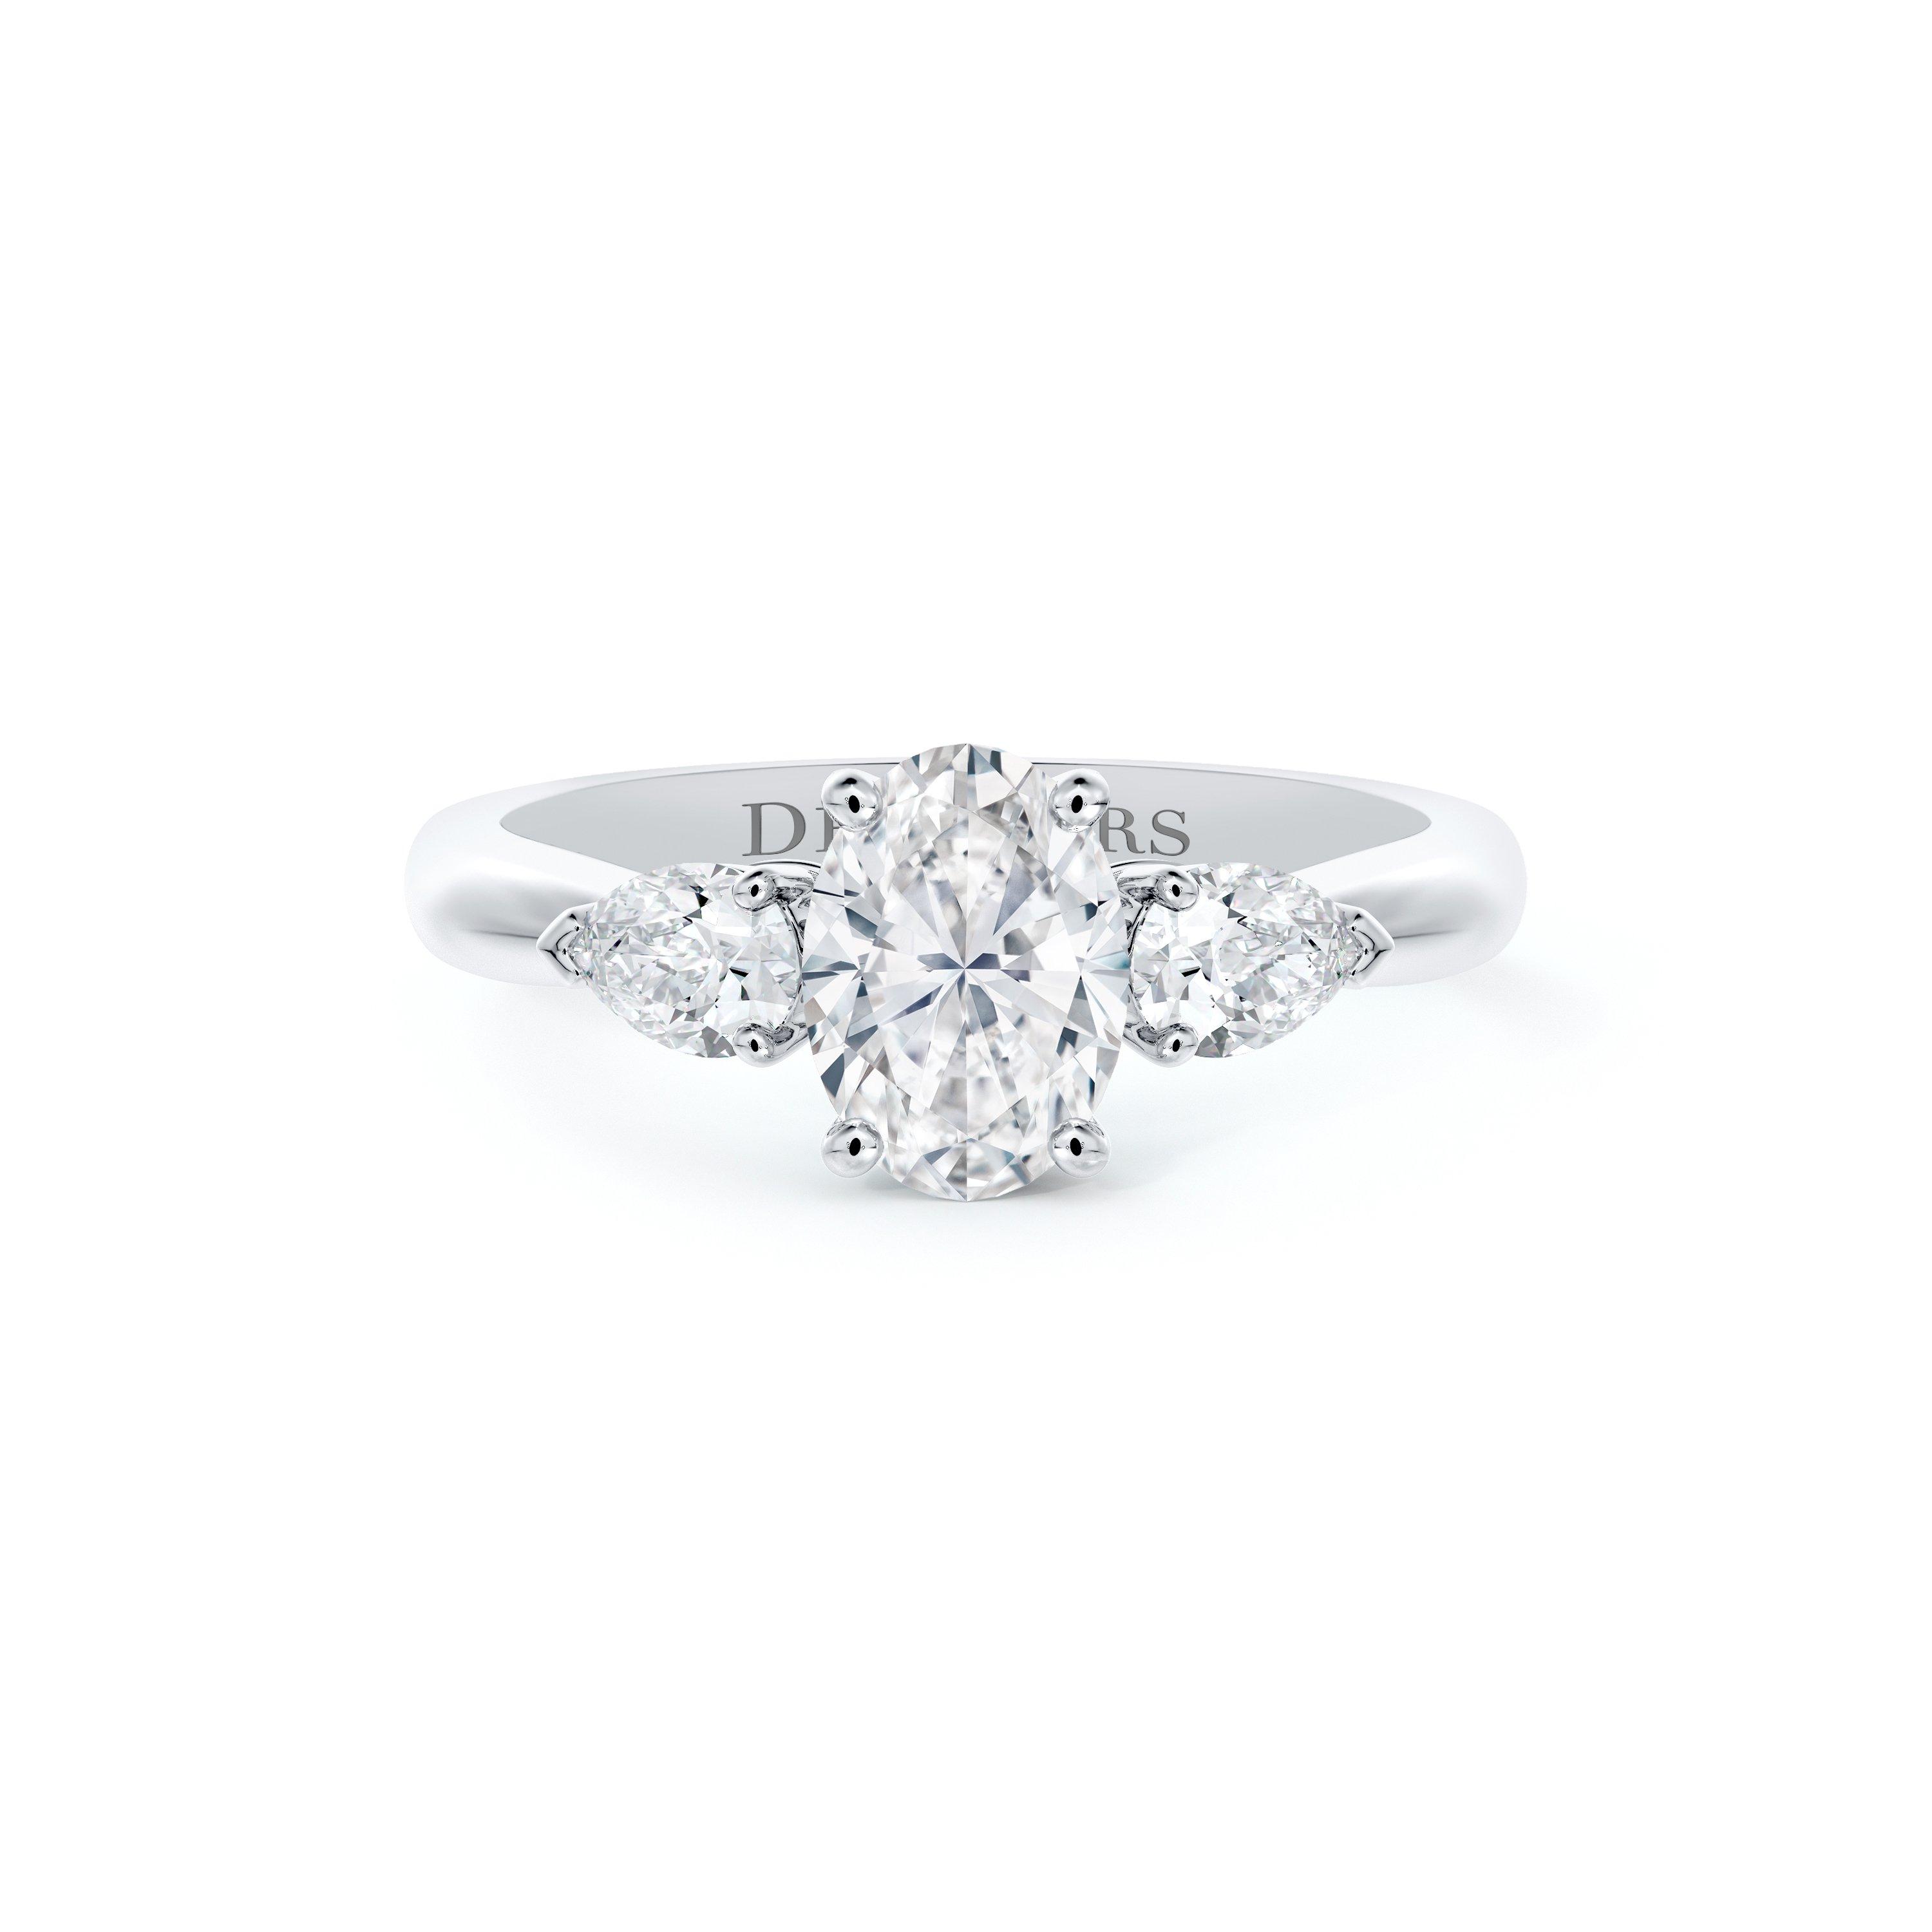 DB Classic Oval-Shaped Centre with Pear-Shaped Side Stones Diamond Ring